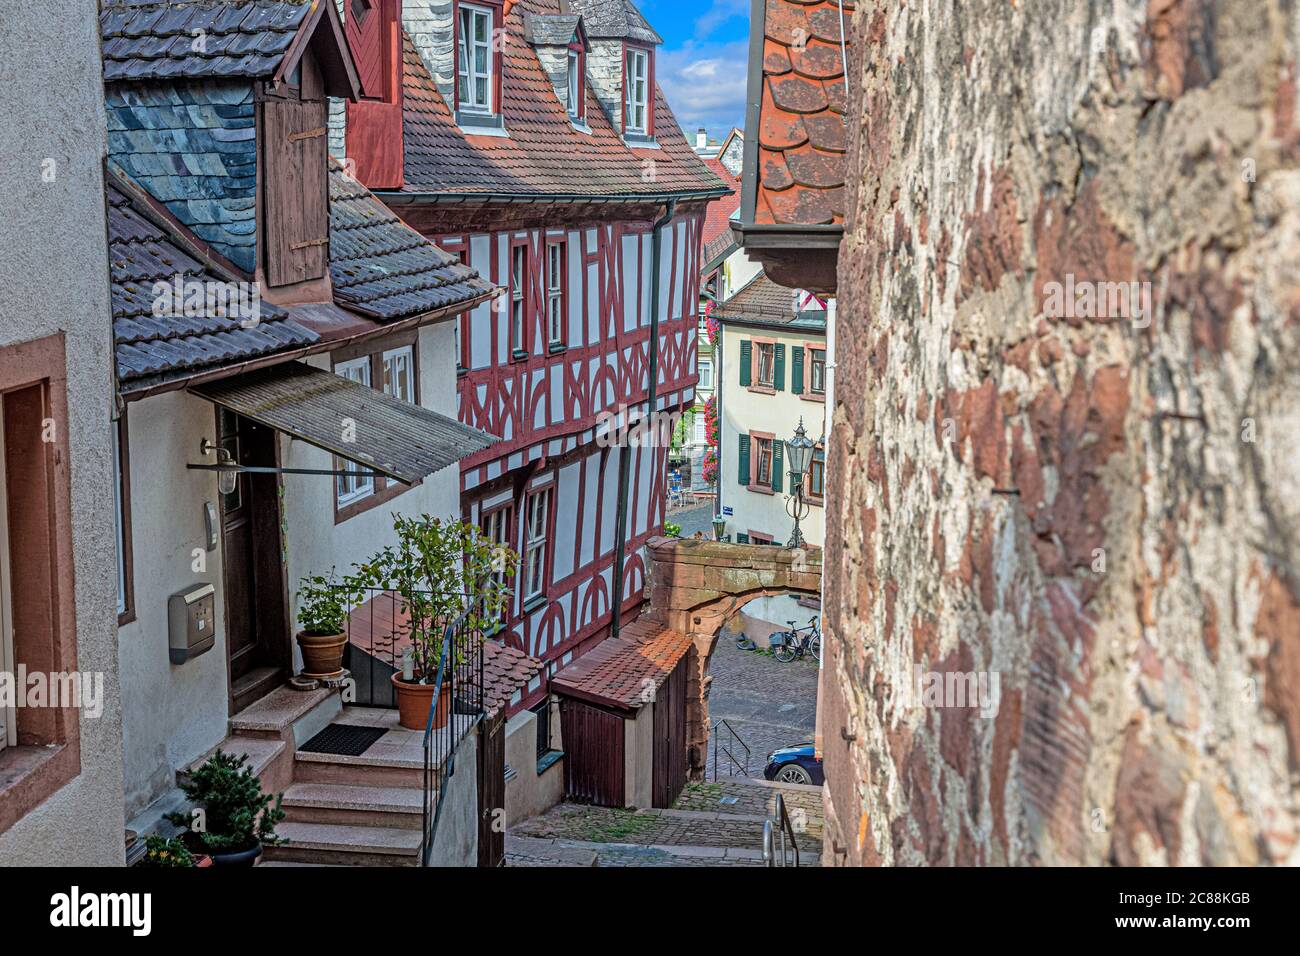 Small alley in the medieval German city of Miltenberg during daytime Stock Photo